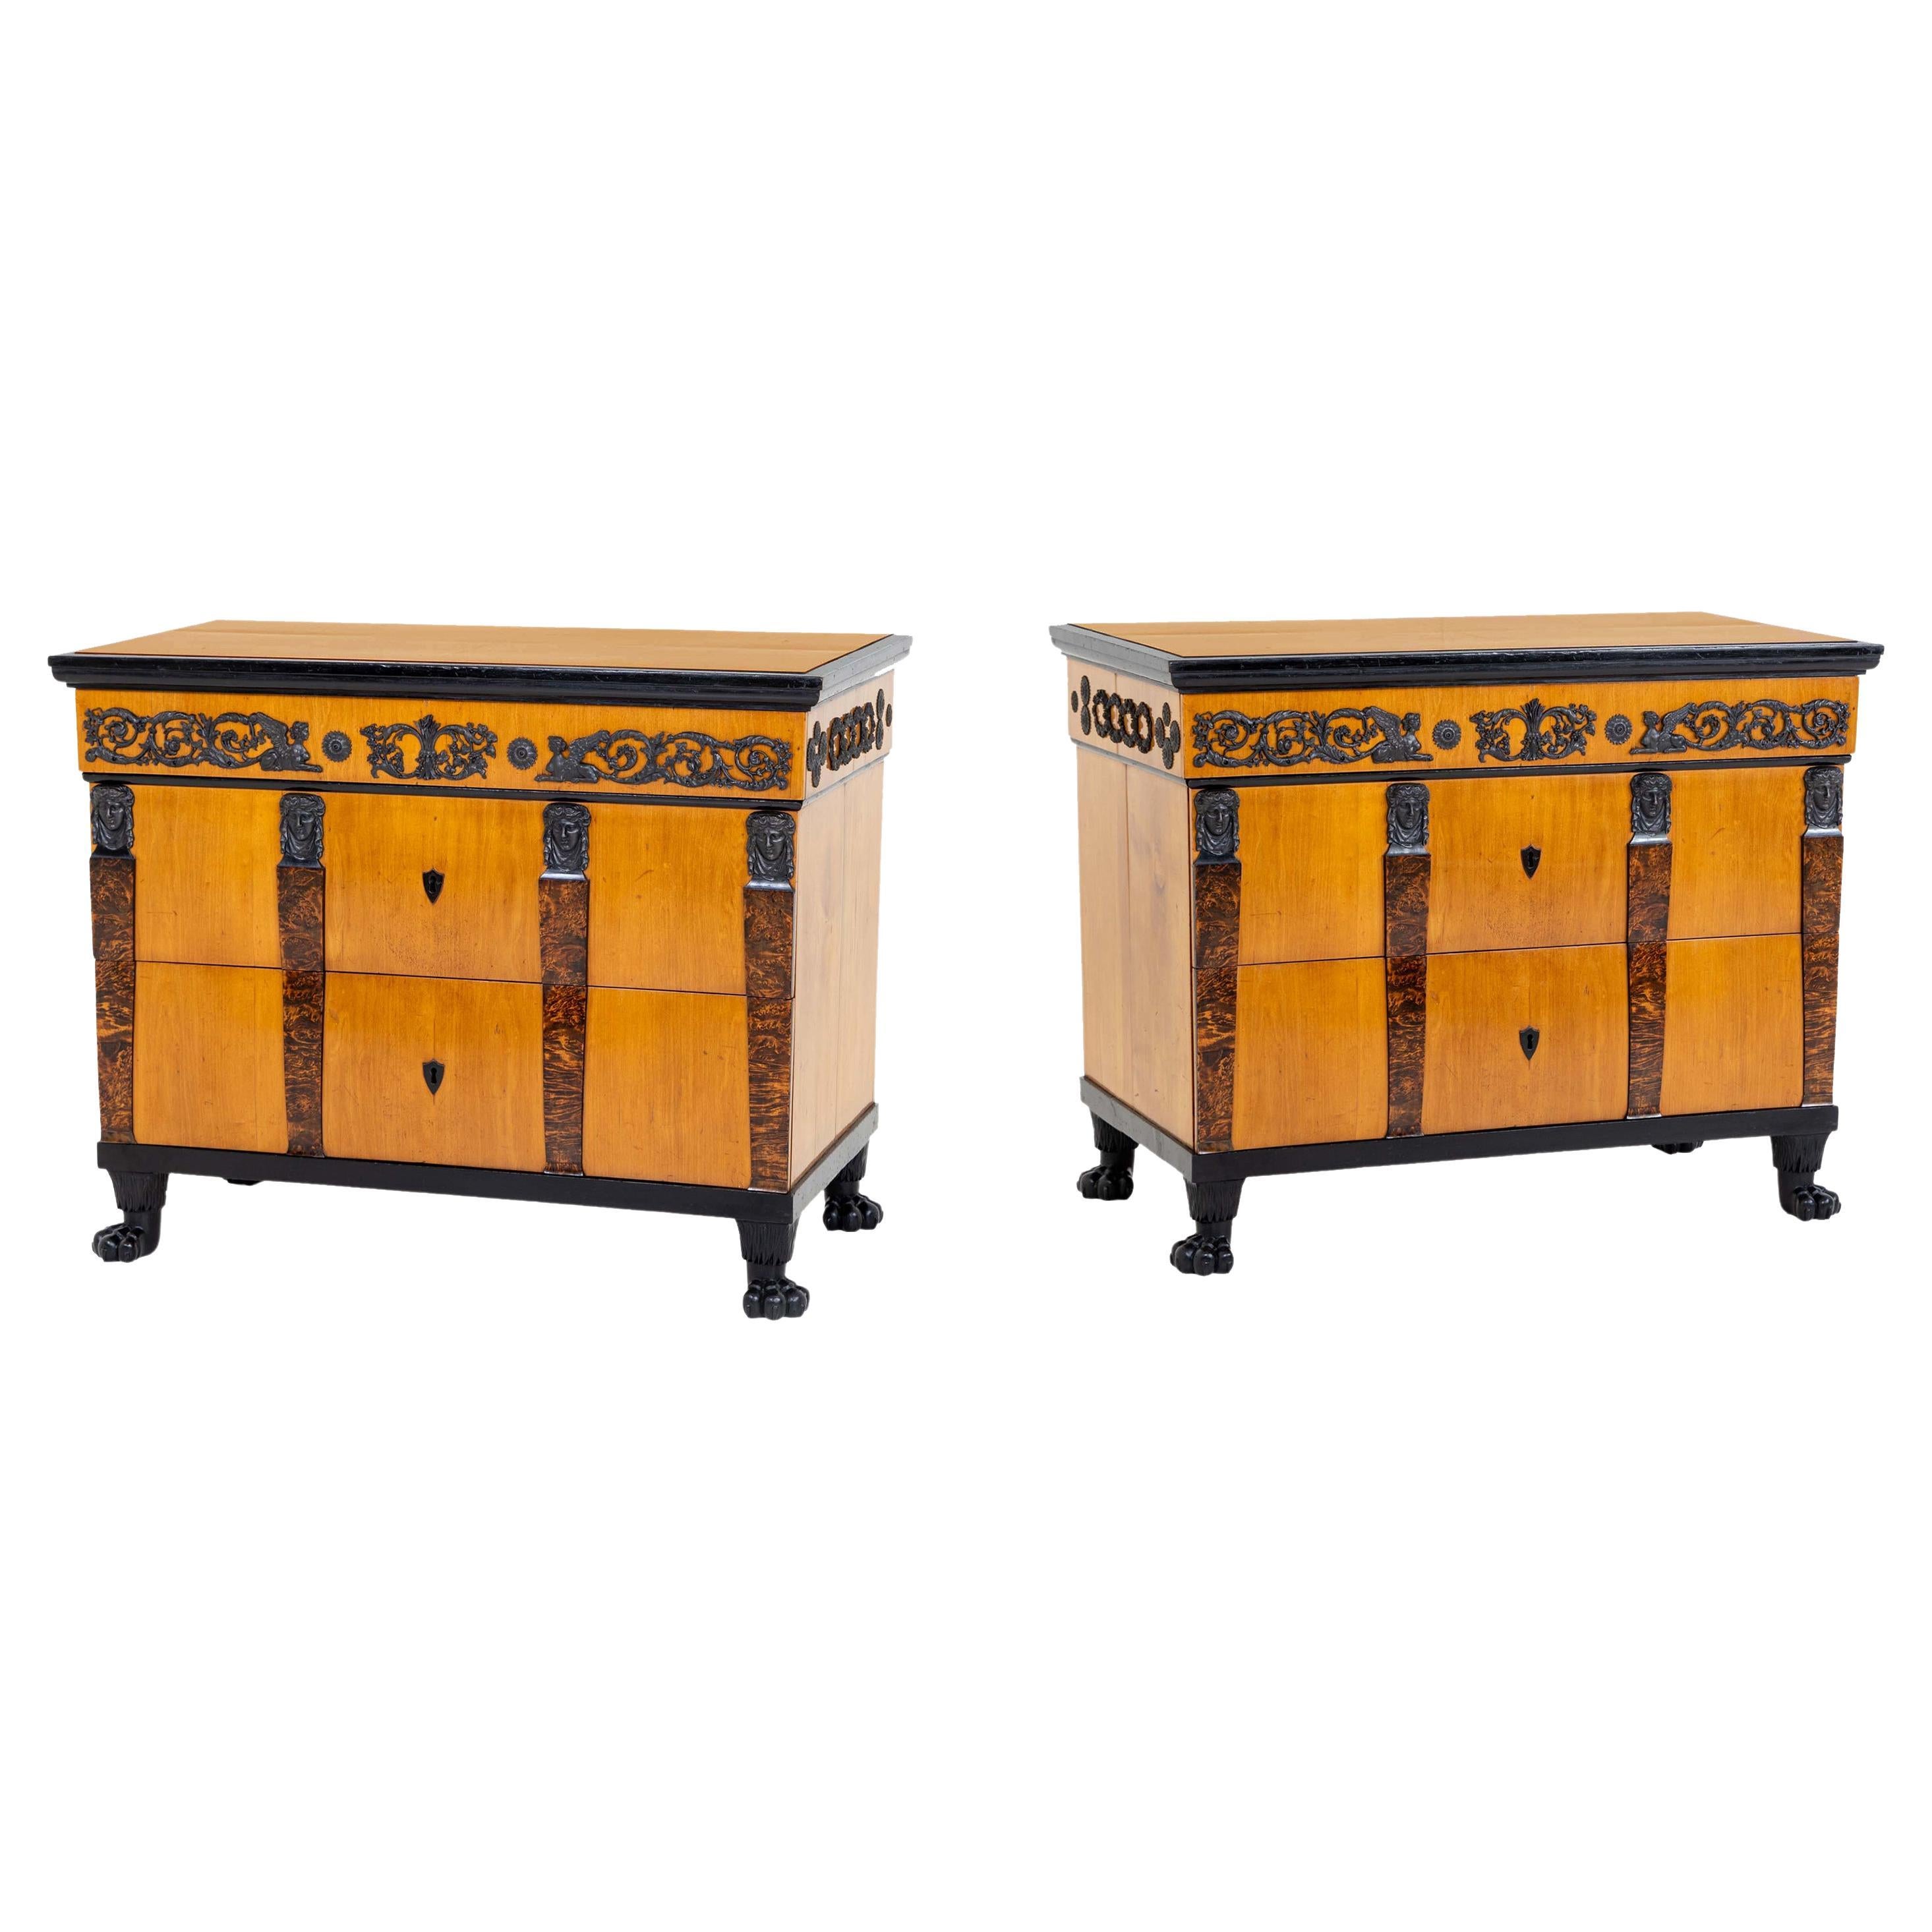 Pair of Important Chests With Berlin Cast Iron Details For Sale